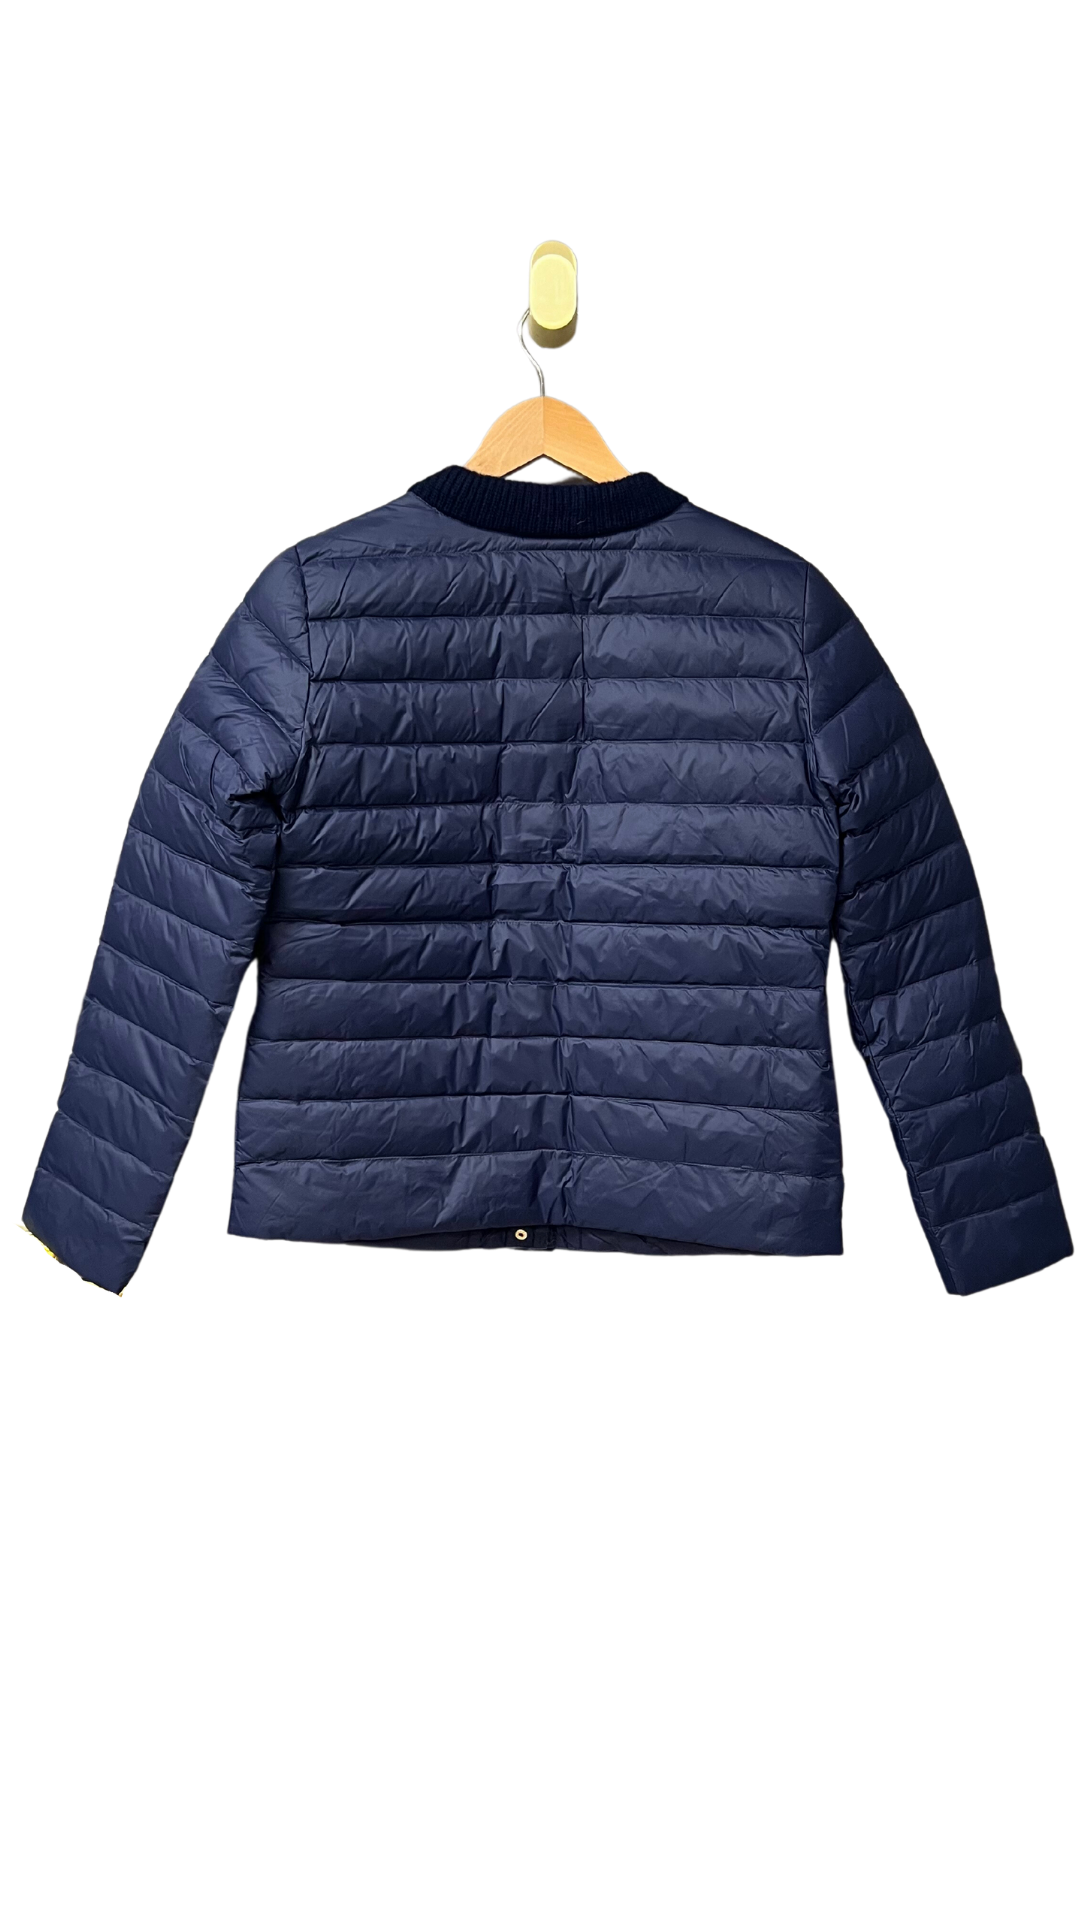 Val-D'Isere Jacket in Navy